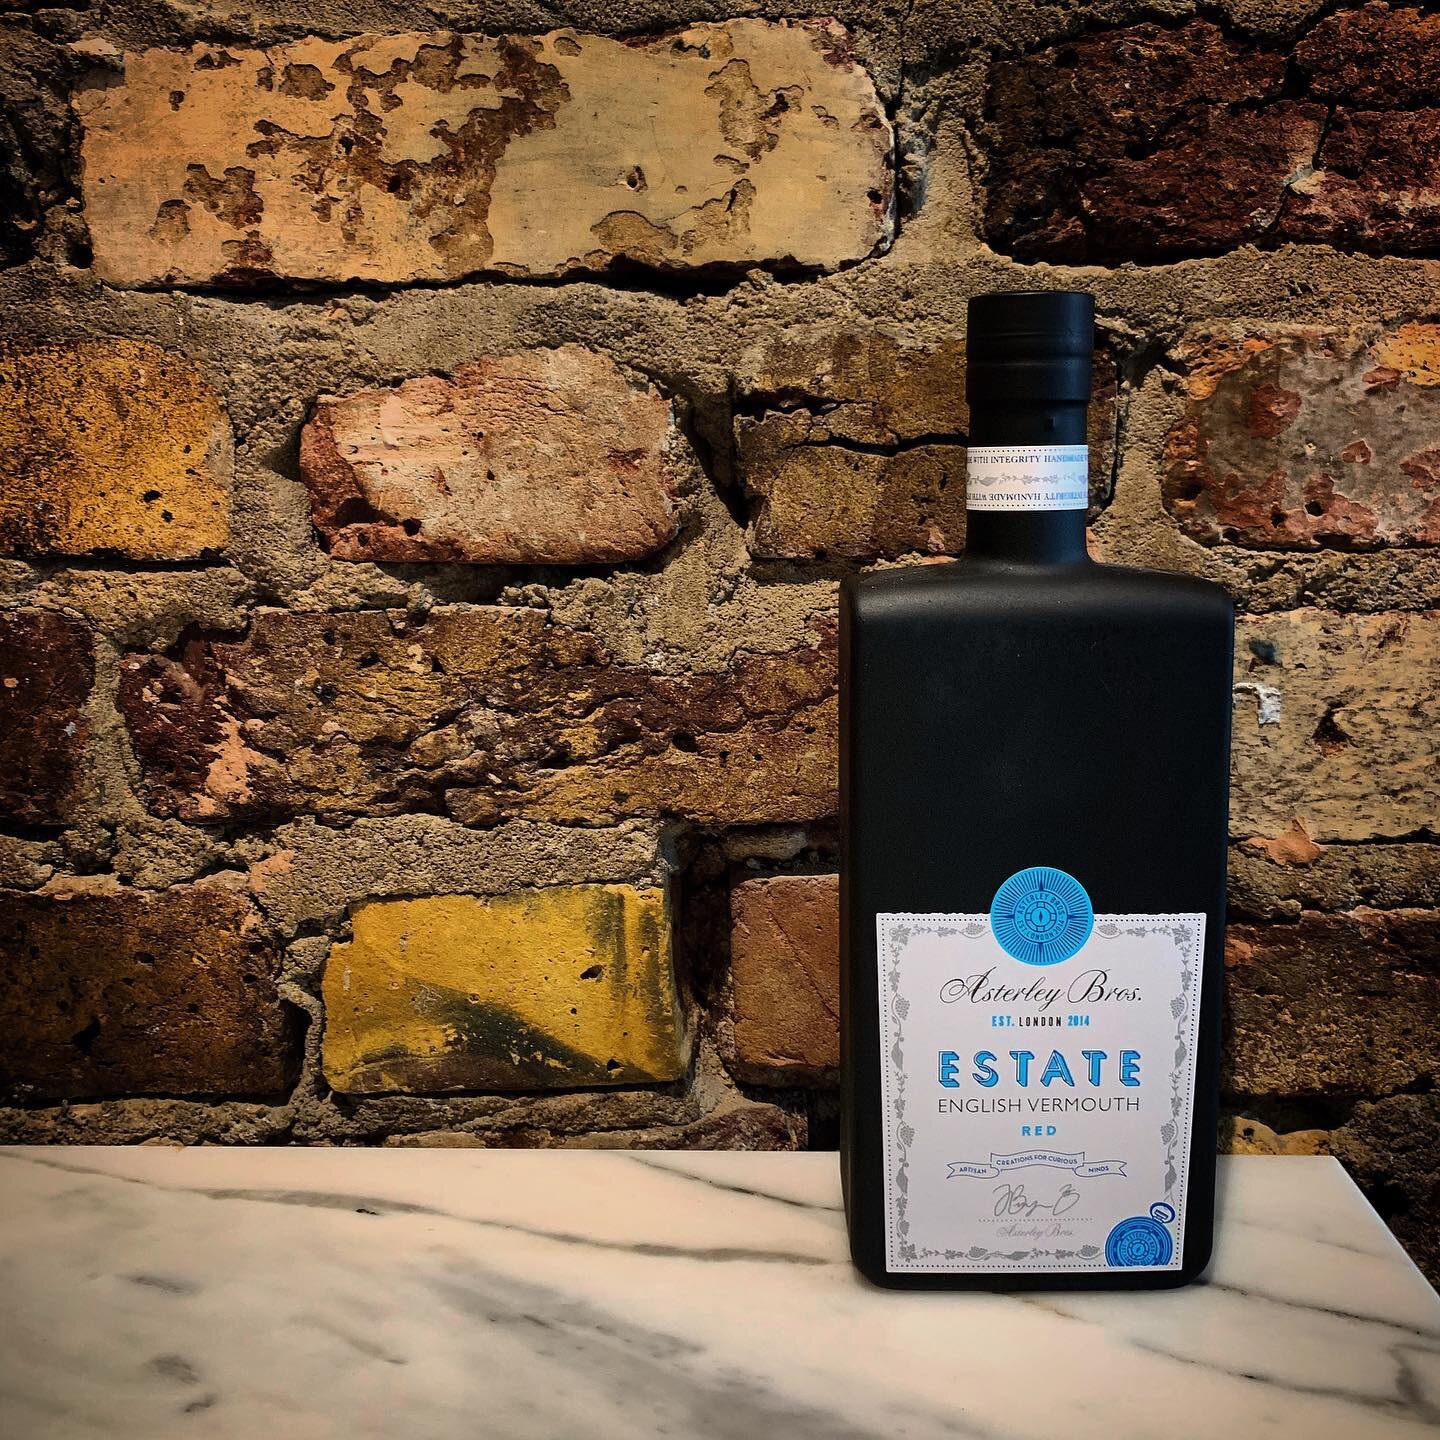 ESTATE. 
-
Our sweet vermouth, Estate, is made by infusing 31 botanicals with English pinot noir. Lower in sugar than many traditional vermouths, this is a bright and complex aperitif with delicate tannins from the pinot noir. 
-
Botanicals: Fennel /